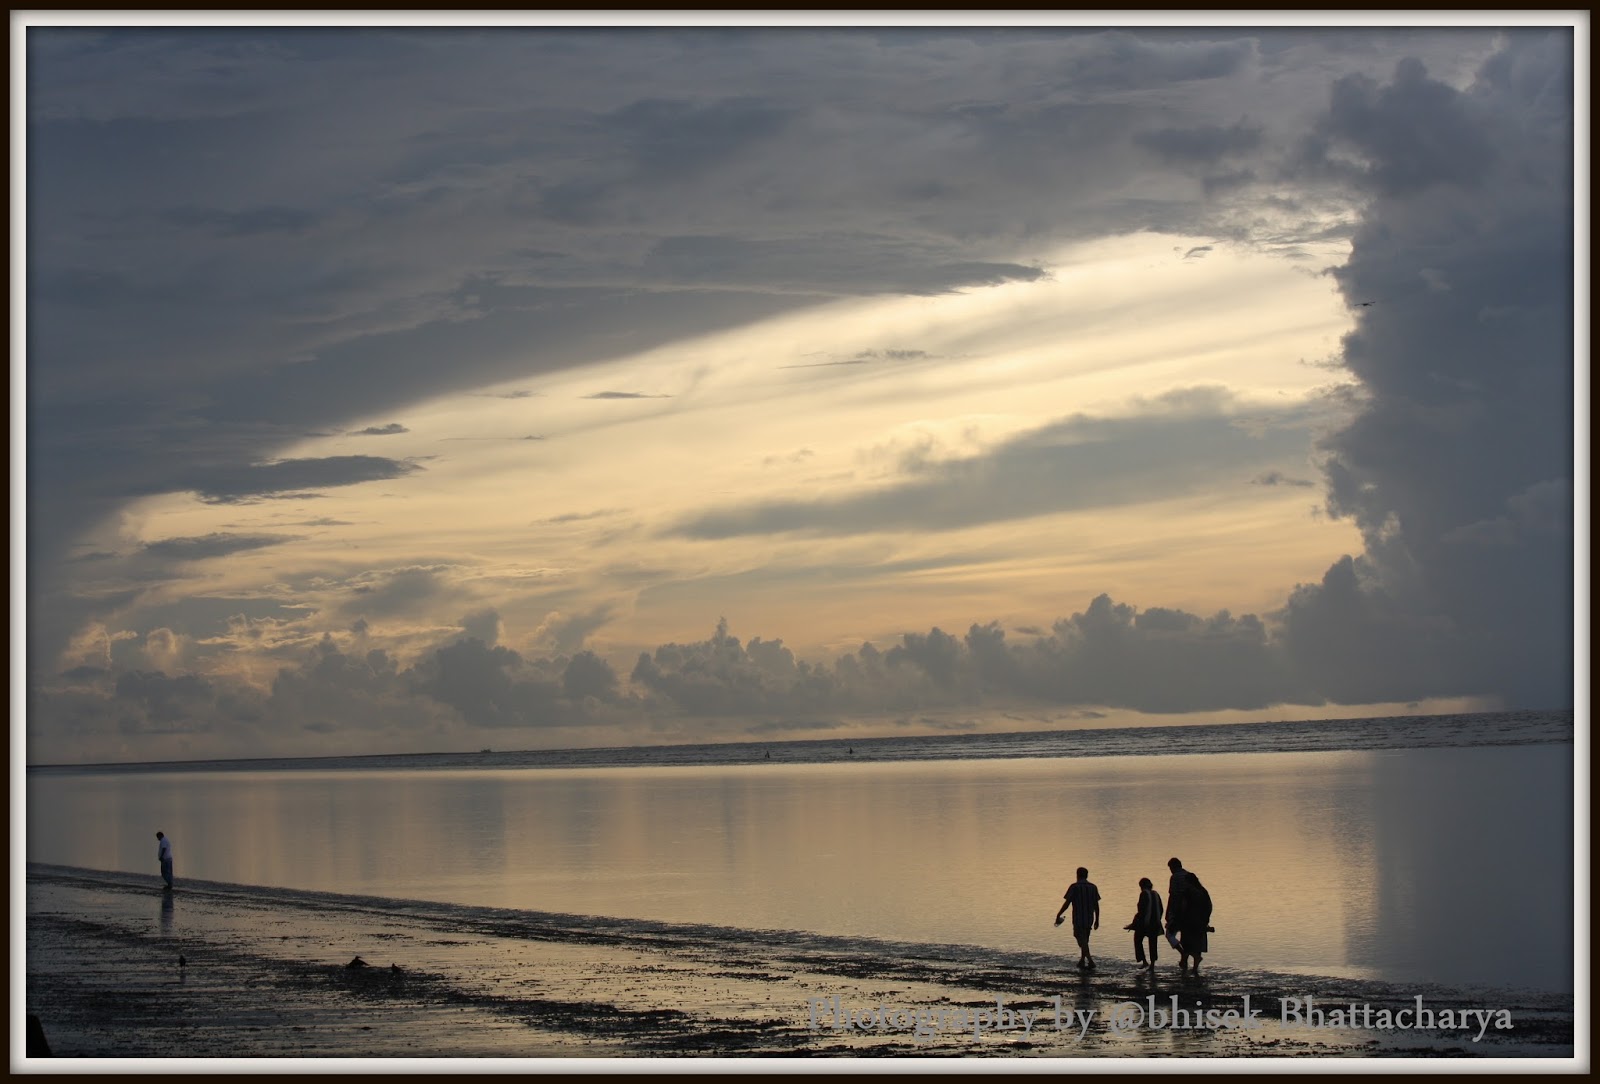 Travelling & Photography: Weekend at Chandipur....Pollution free zone